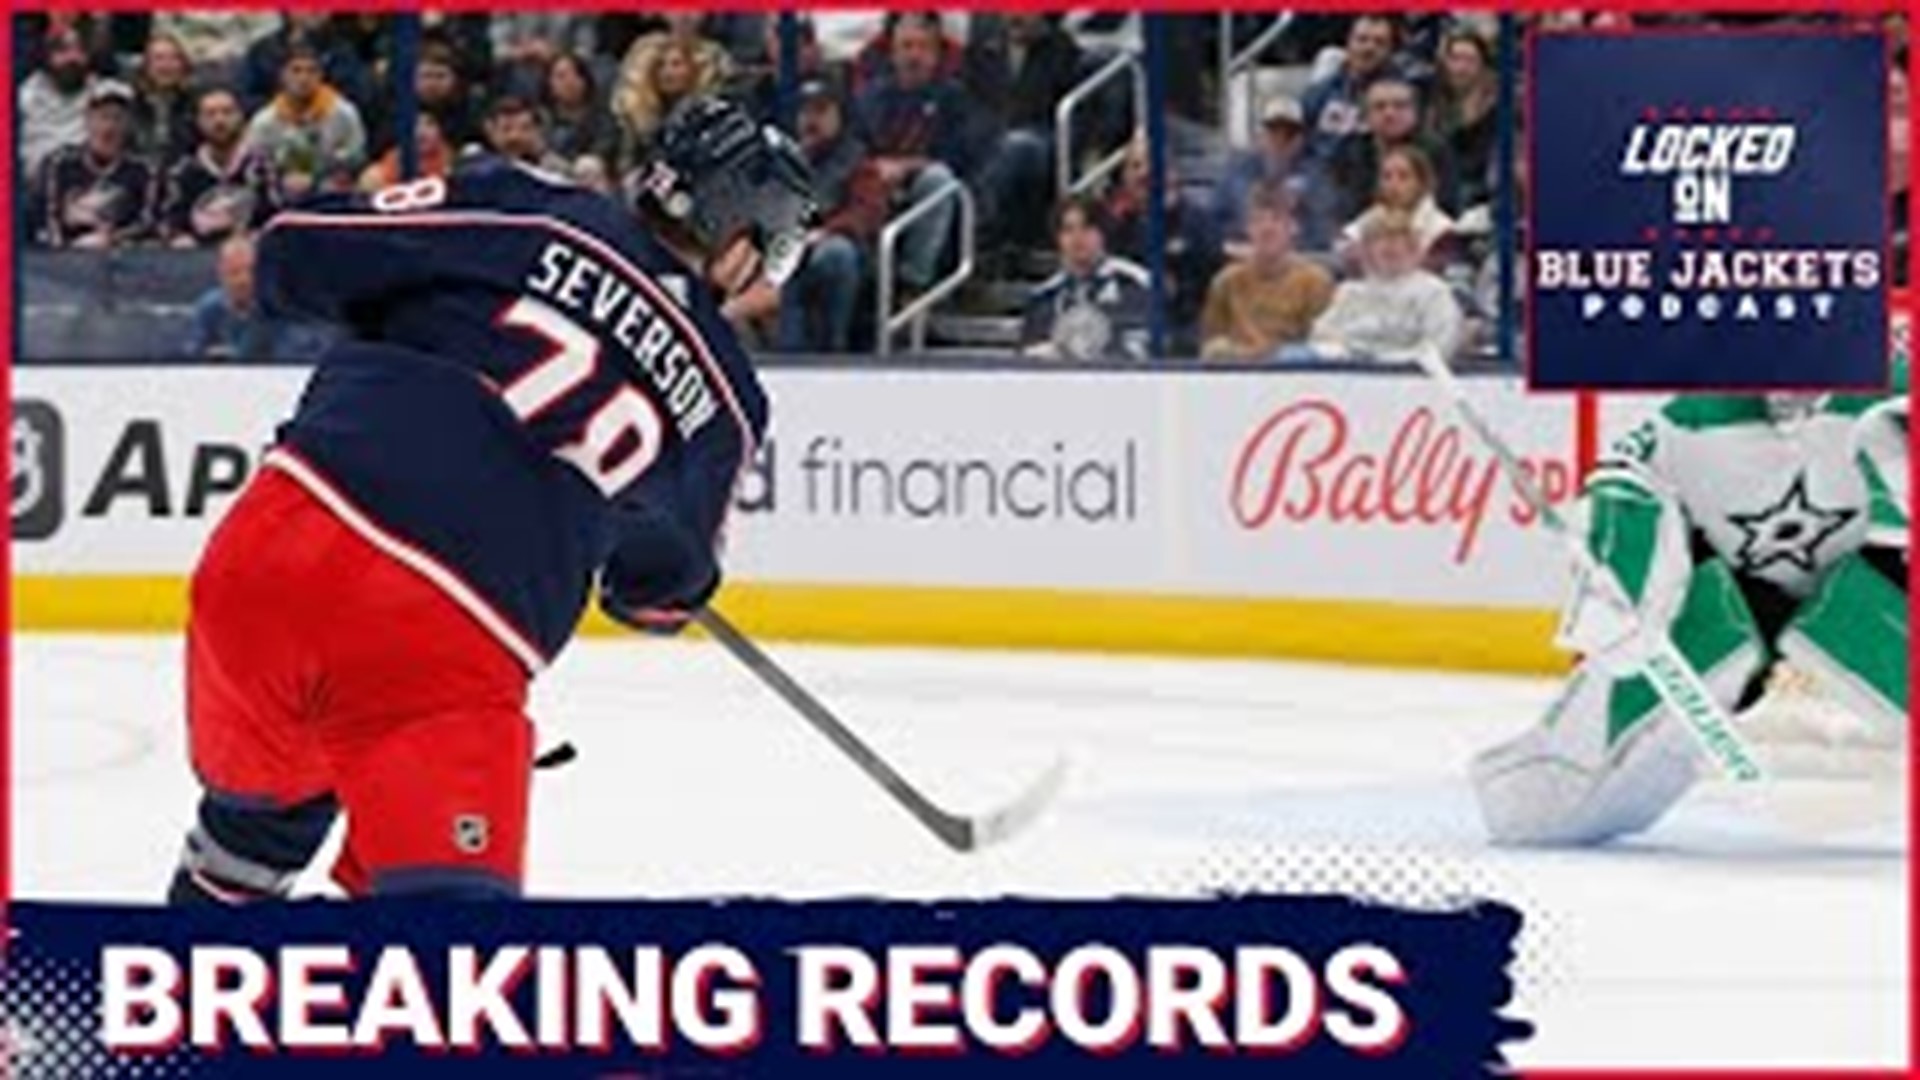 The Blue Jackets got a BIG win over the Flyers last night, with SIX goals scored by defencemen, something that hasn't happened since 1992!